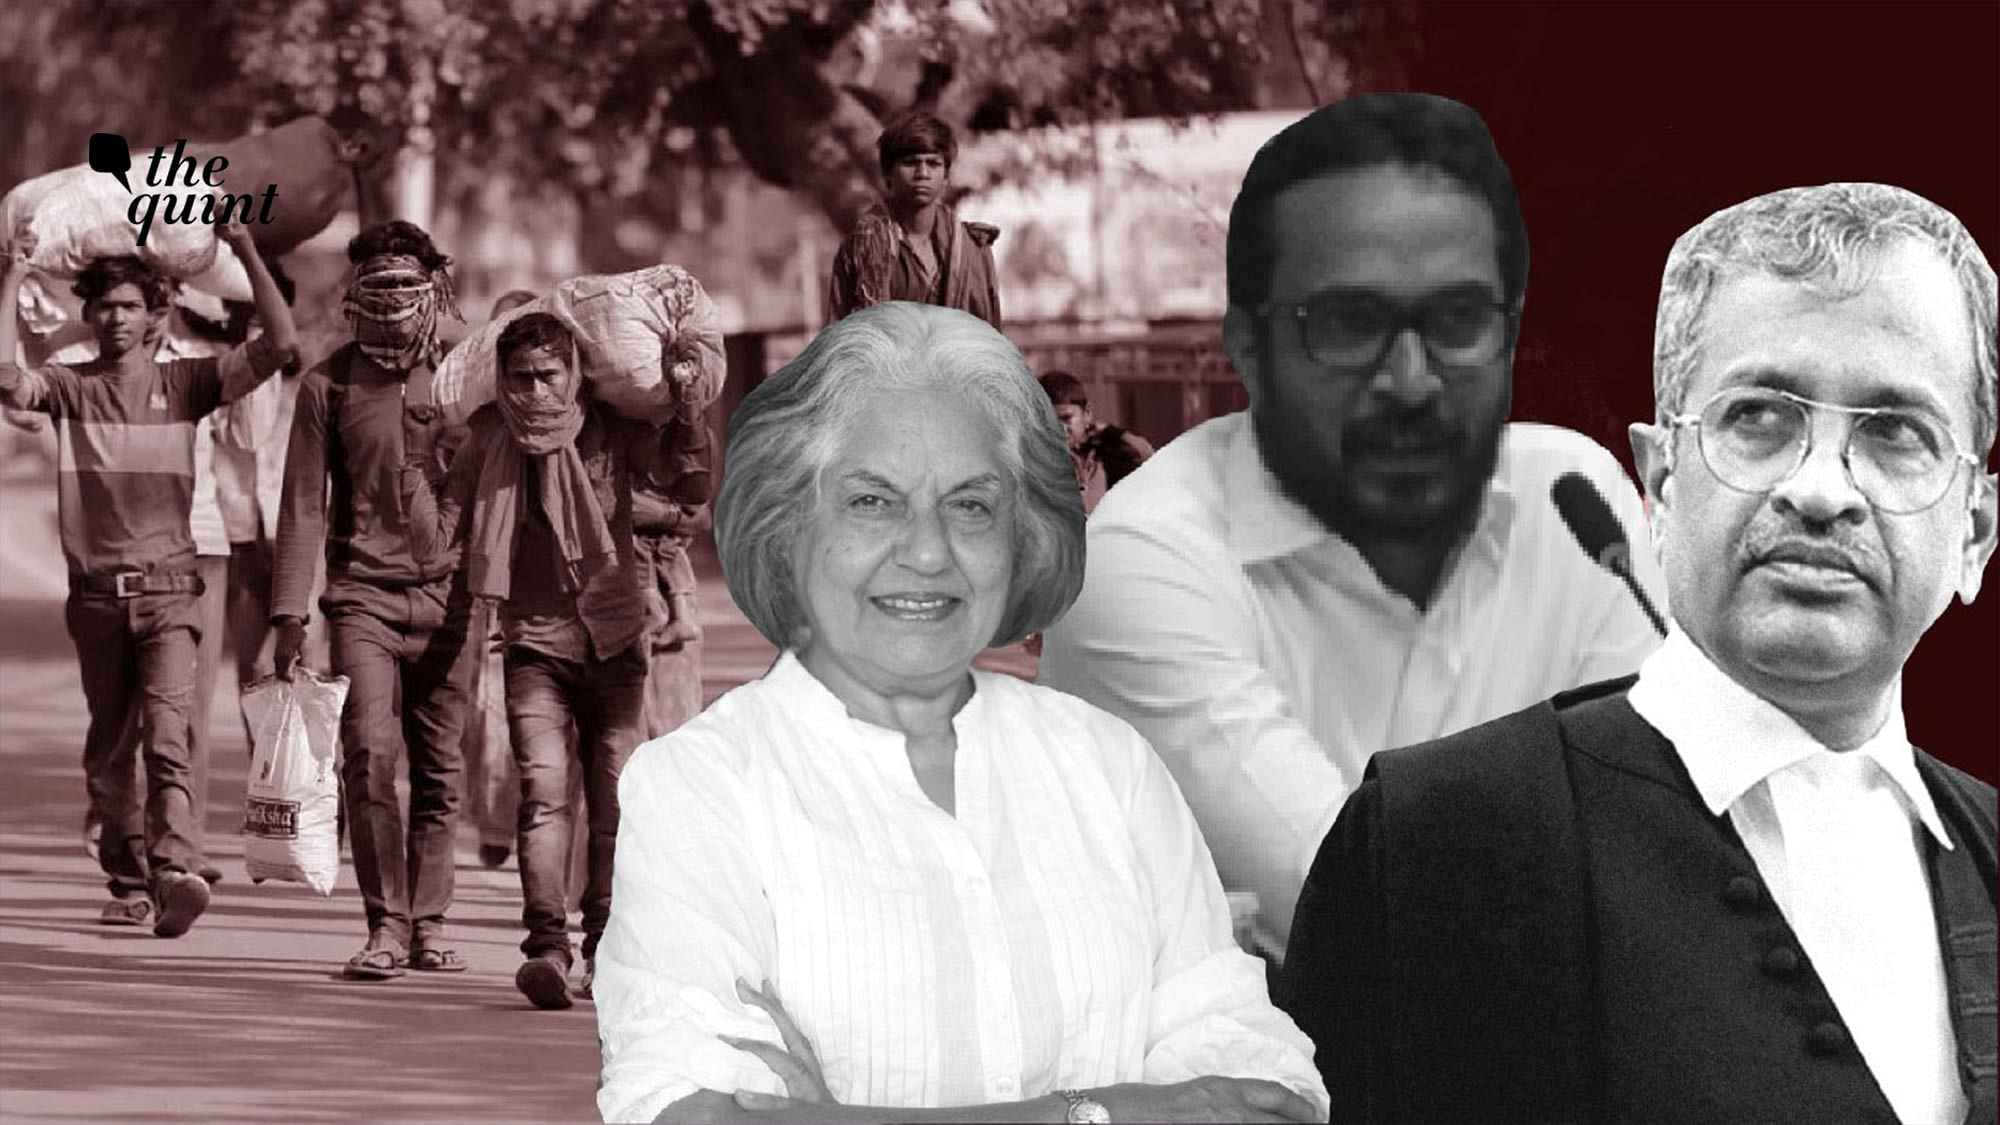 From L-R: Migrant workers on the road, Indira Jaising, Clifton Rozario and Sanjay Hegde.